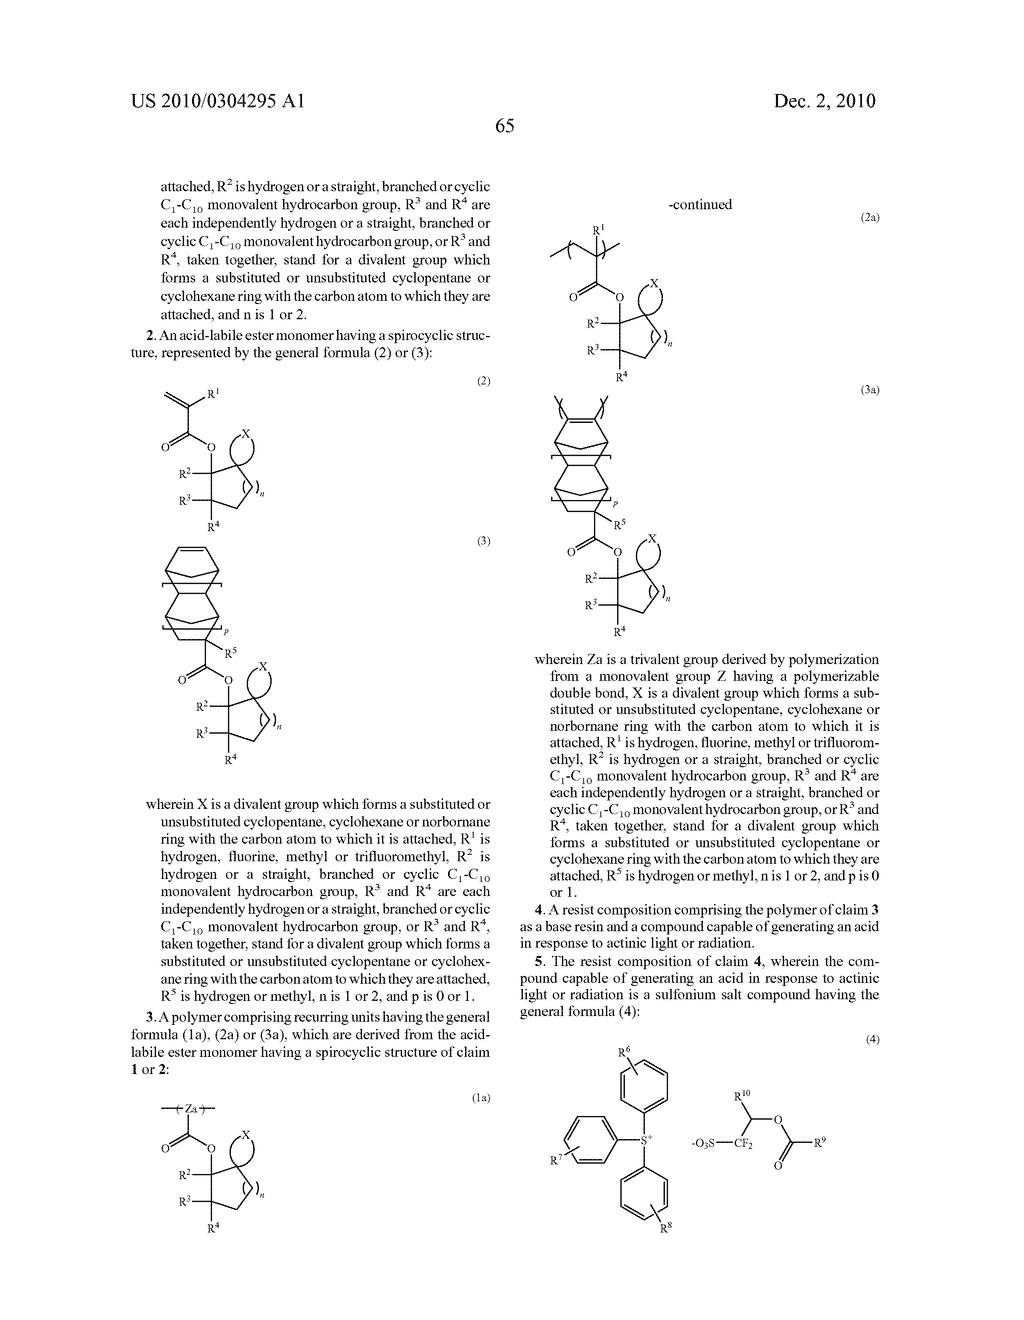 ACID-LABILE ESTER MONOMER HAVING SPIROCYCLIC STRUCTURE, POLYMER, RESIST COMPOSITION, AND PATTERNING PROCESS - diagram, schematic, and image 66